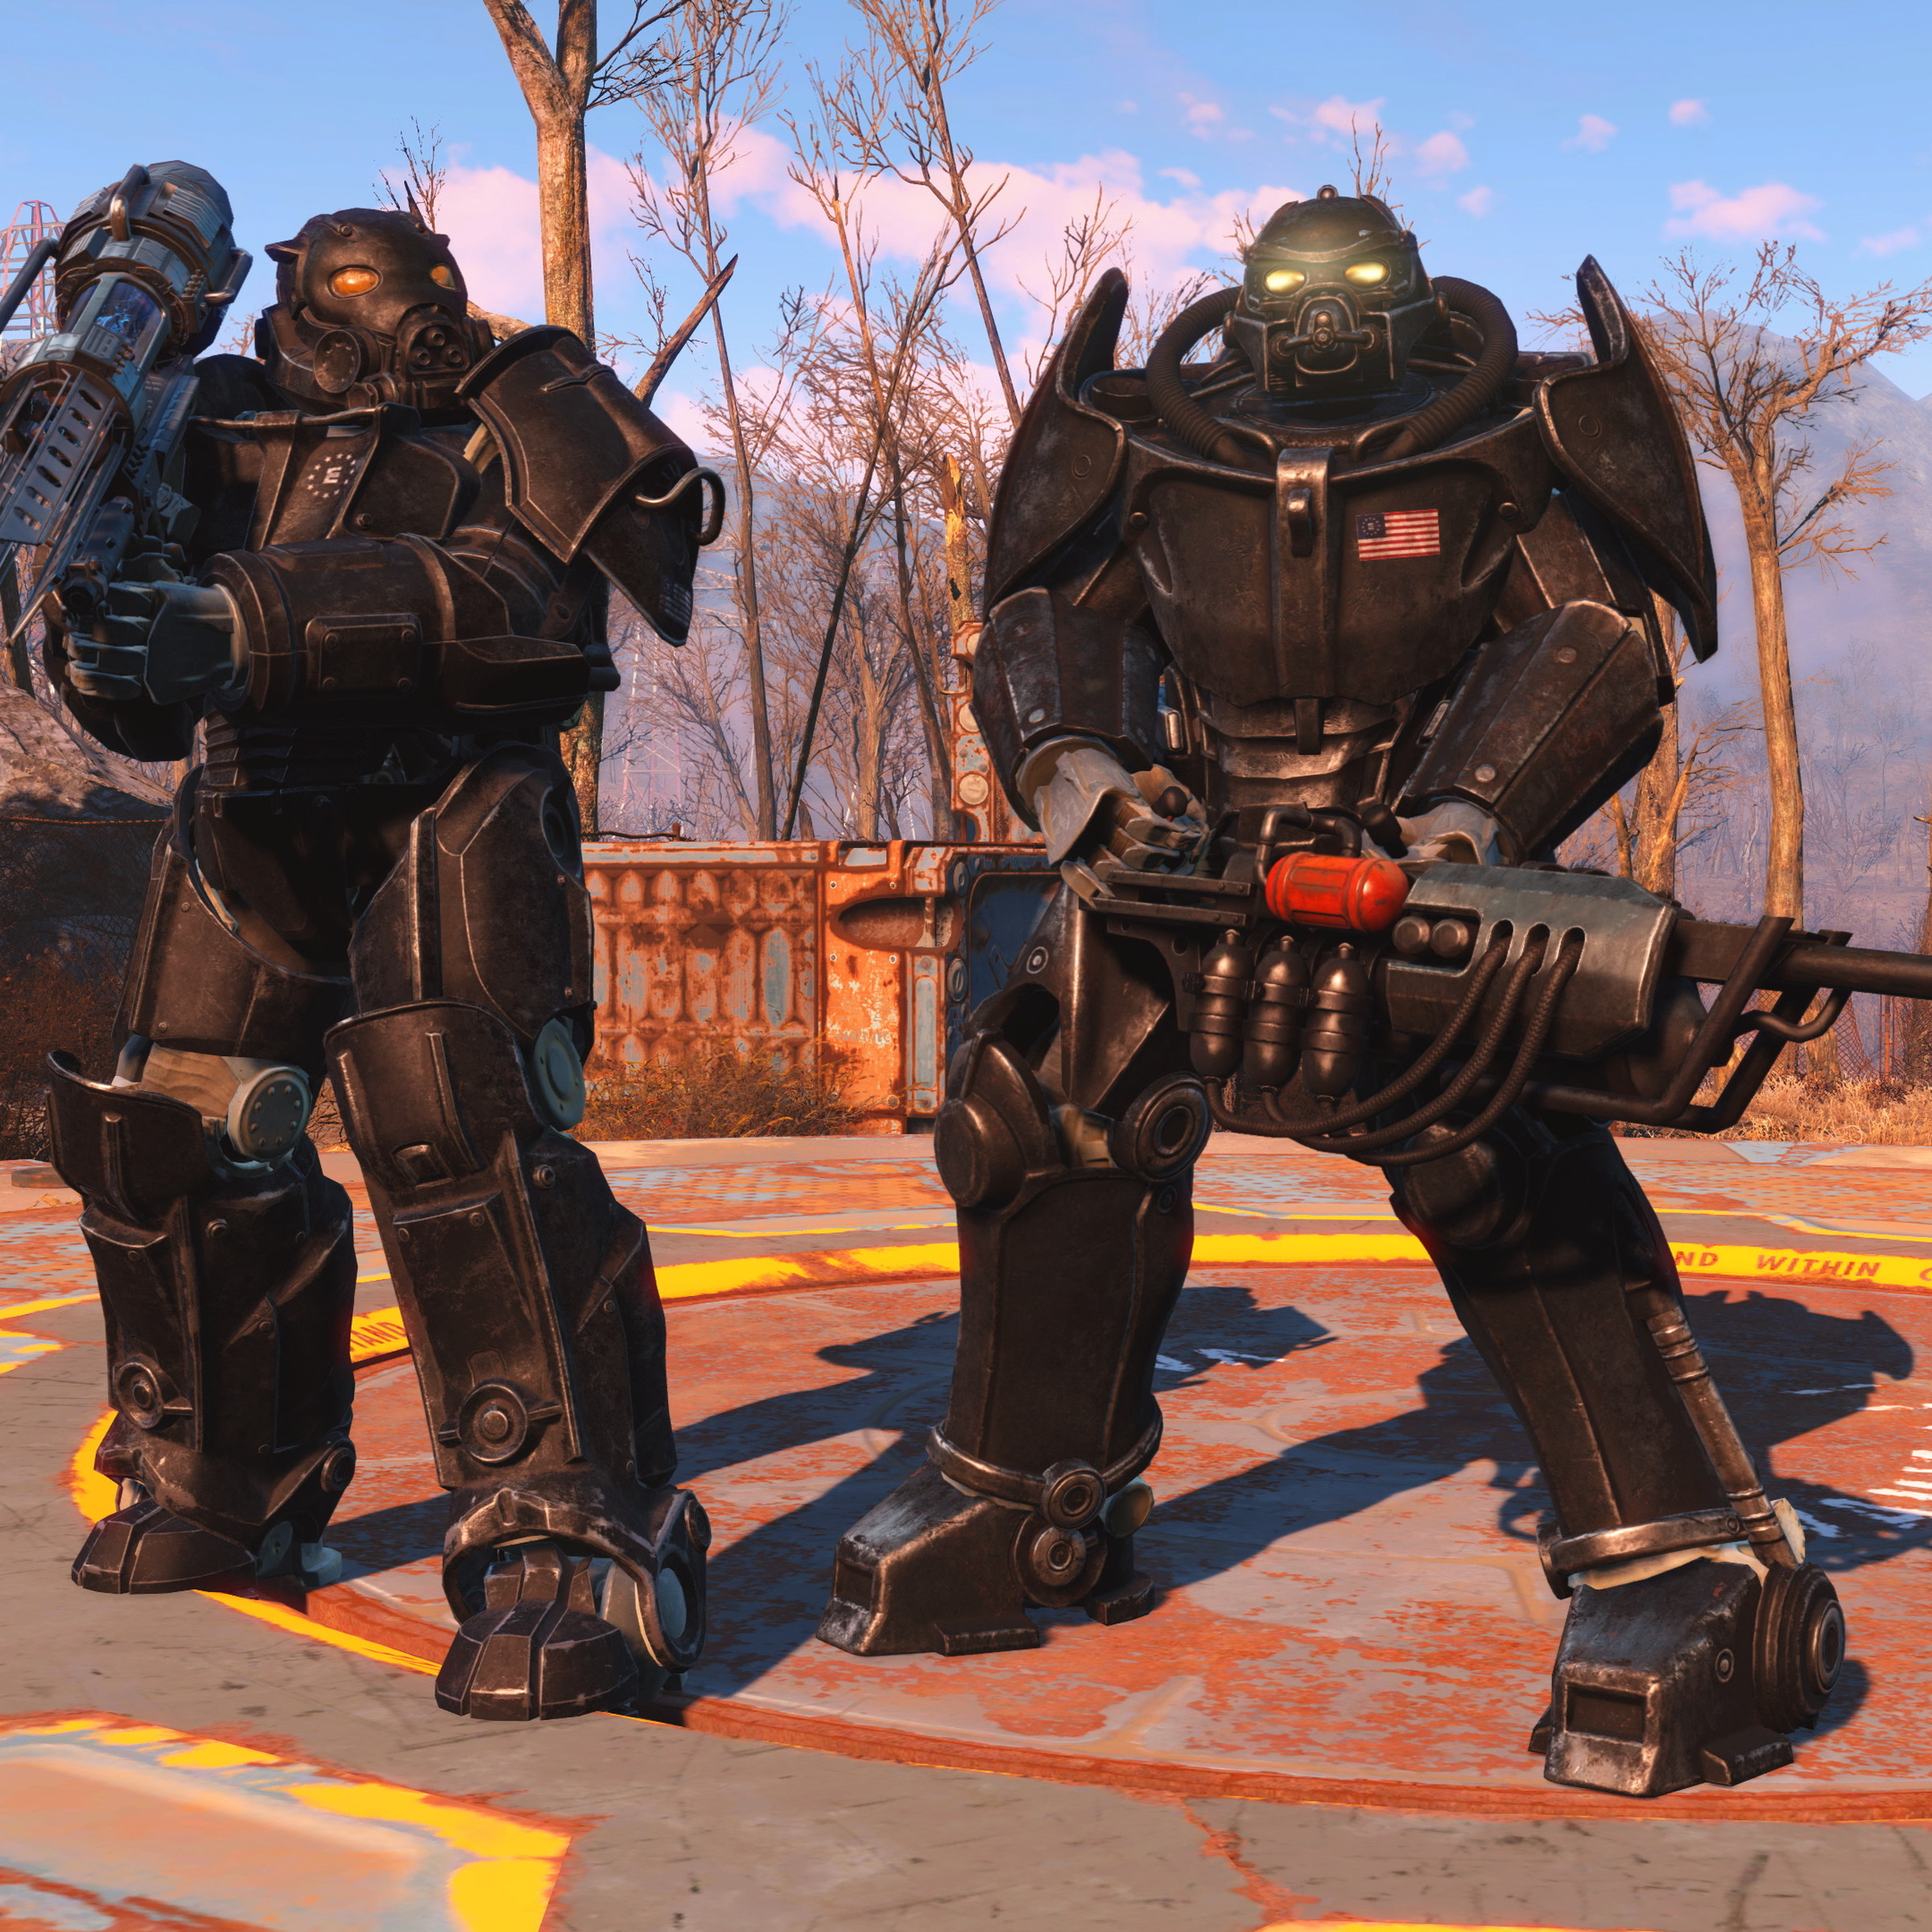 Screenshot from Fallout 4 featuring two characters in power armor.